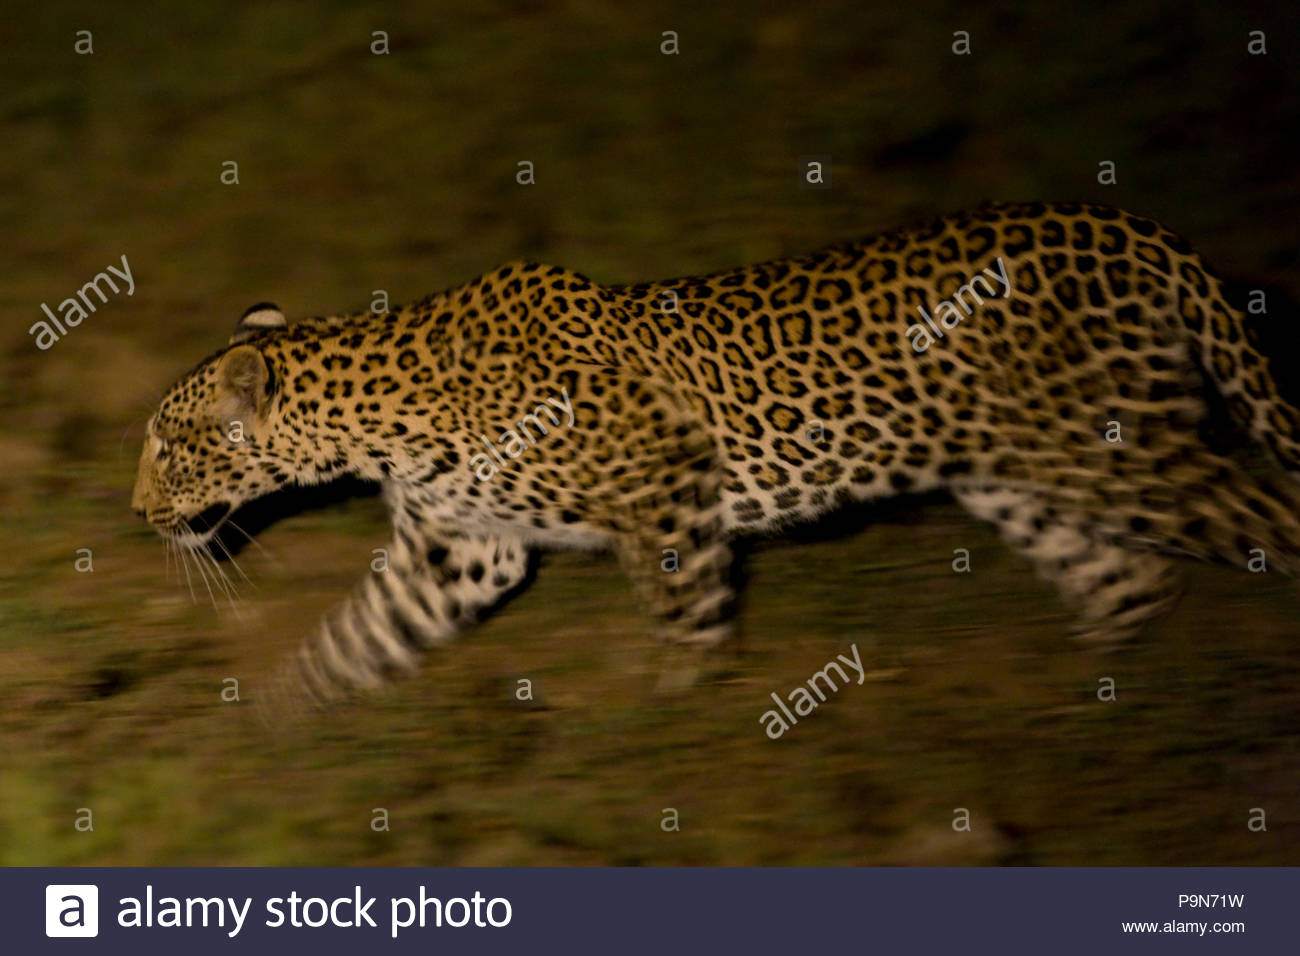 A leopard, Panthera pardus, on the move at night. Stock Photo